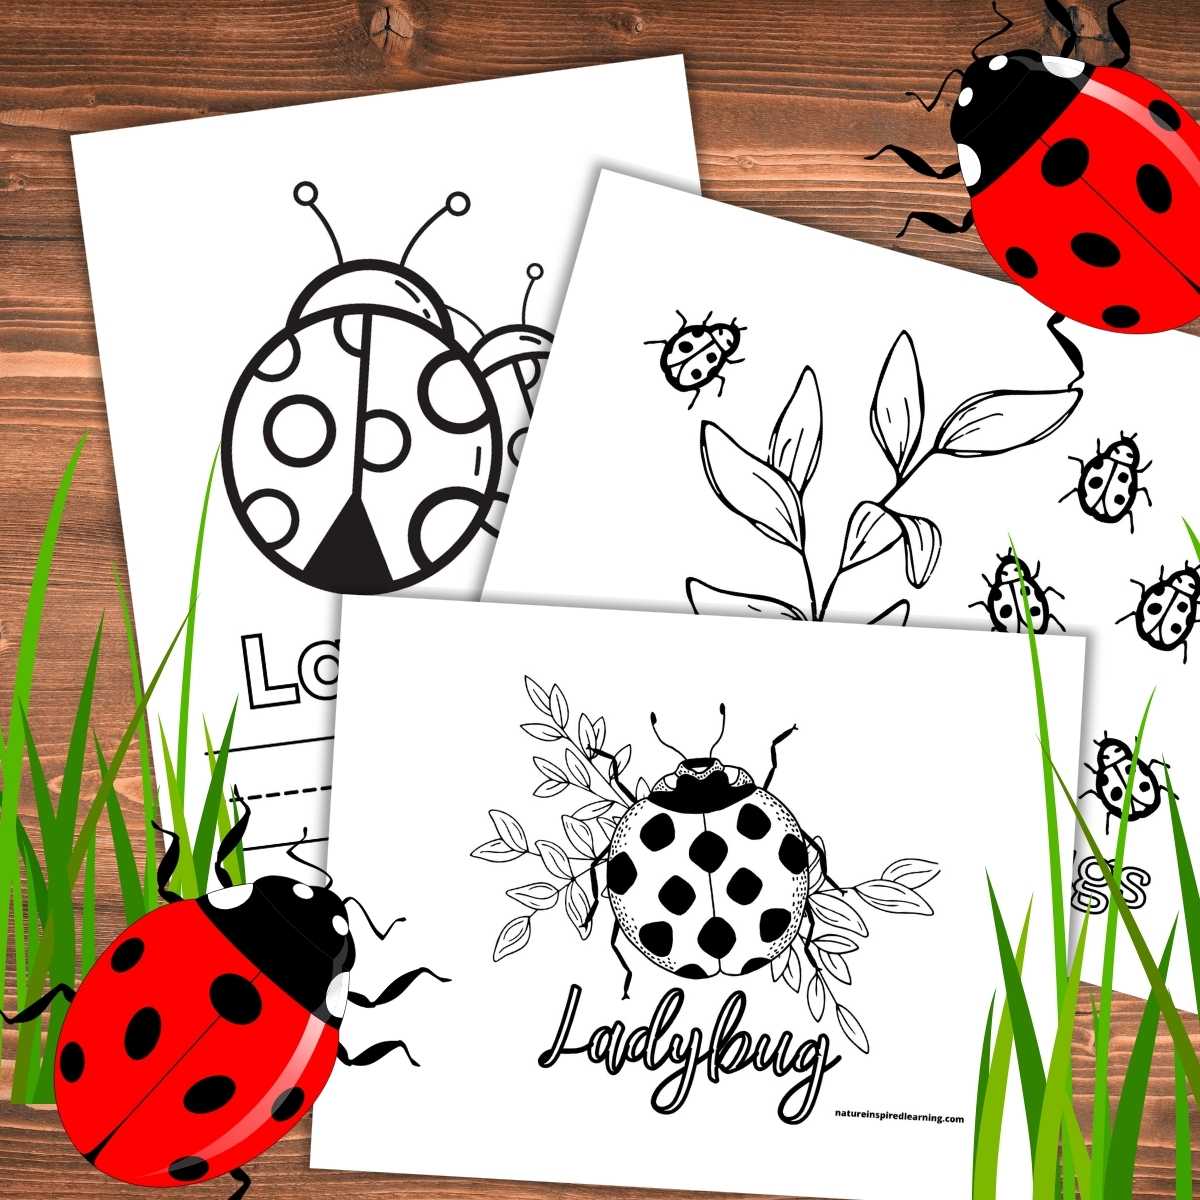 Ladybug coloring pages and printables for kids